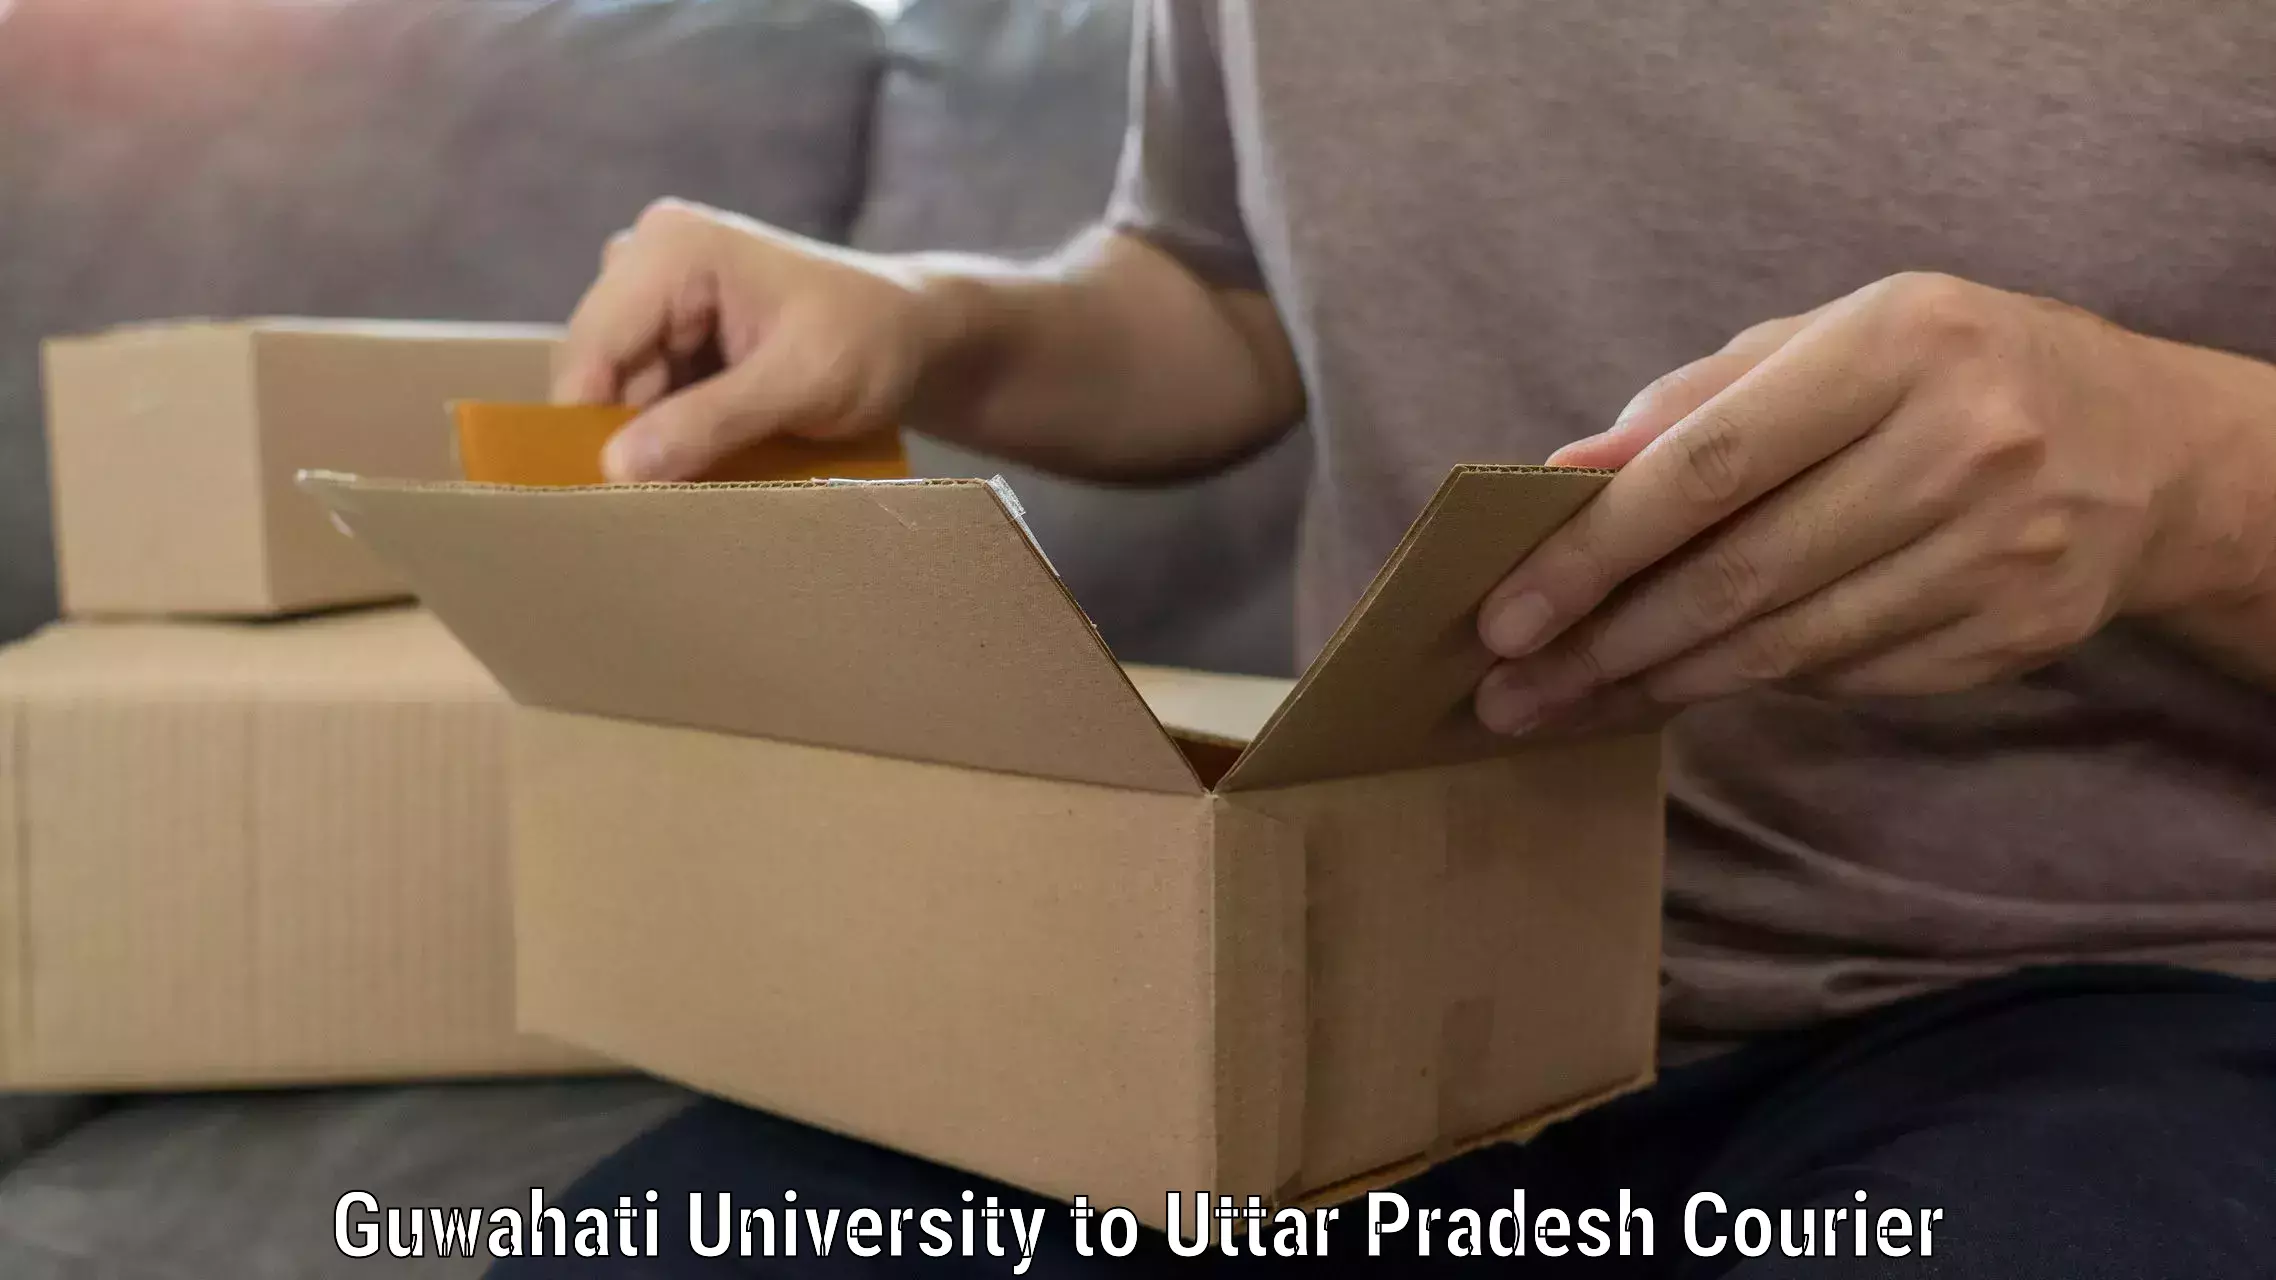 Professional movers and packers Guwahati University to Rath